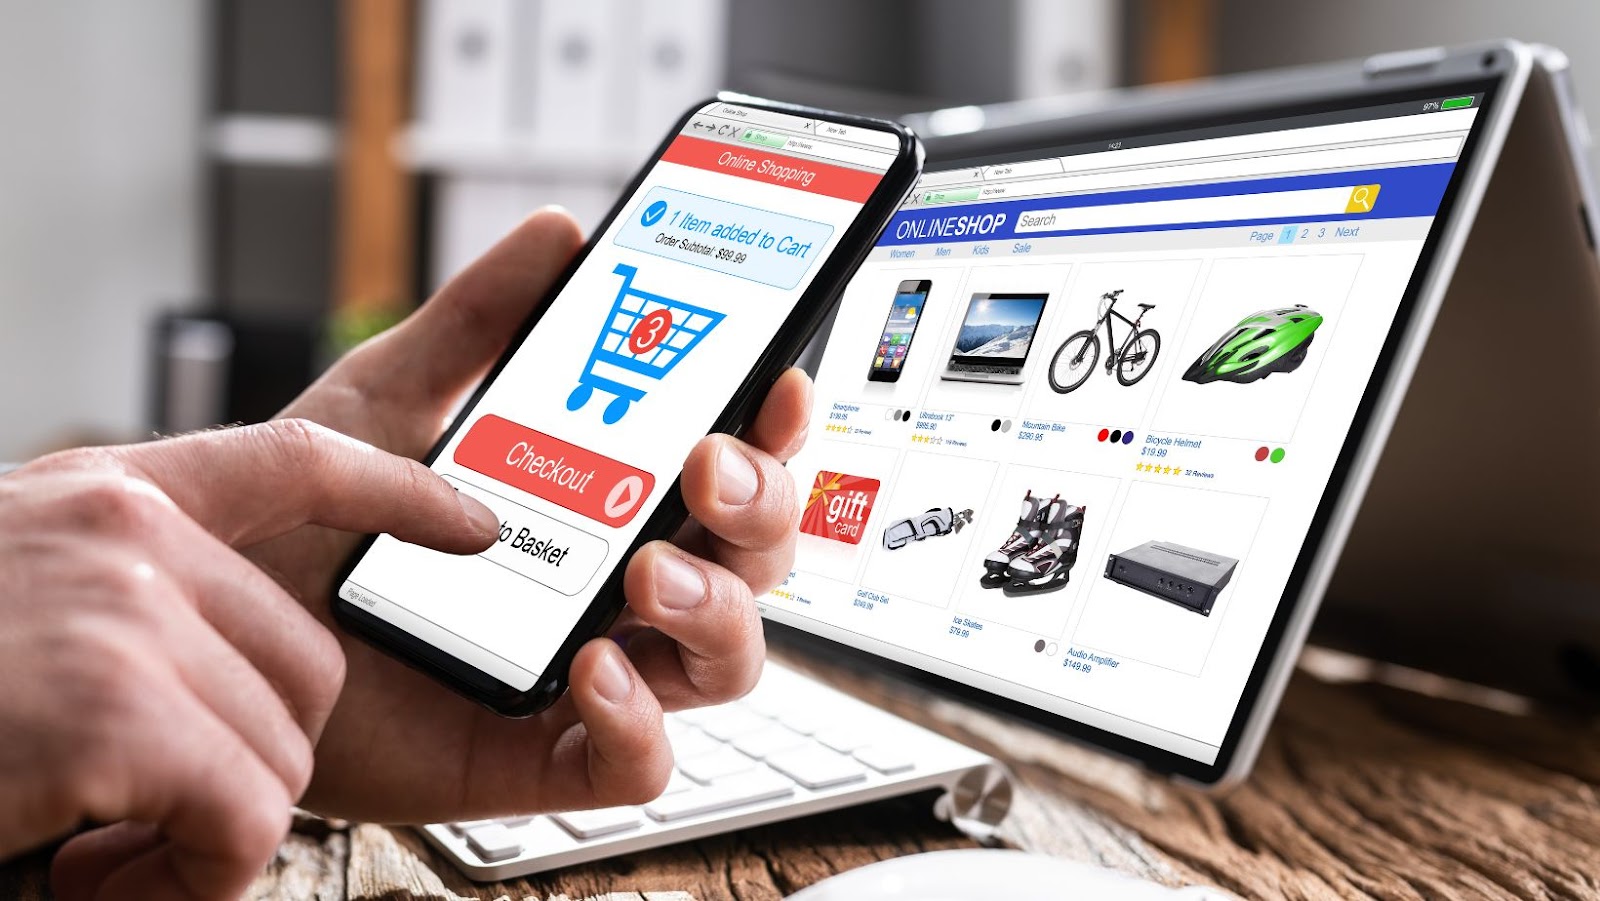 Bukalapak: One of Indonesia’s largest e-commerce firms